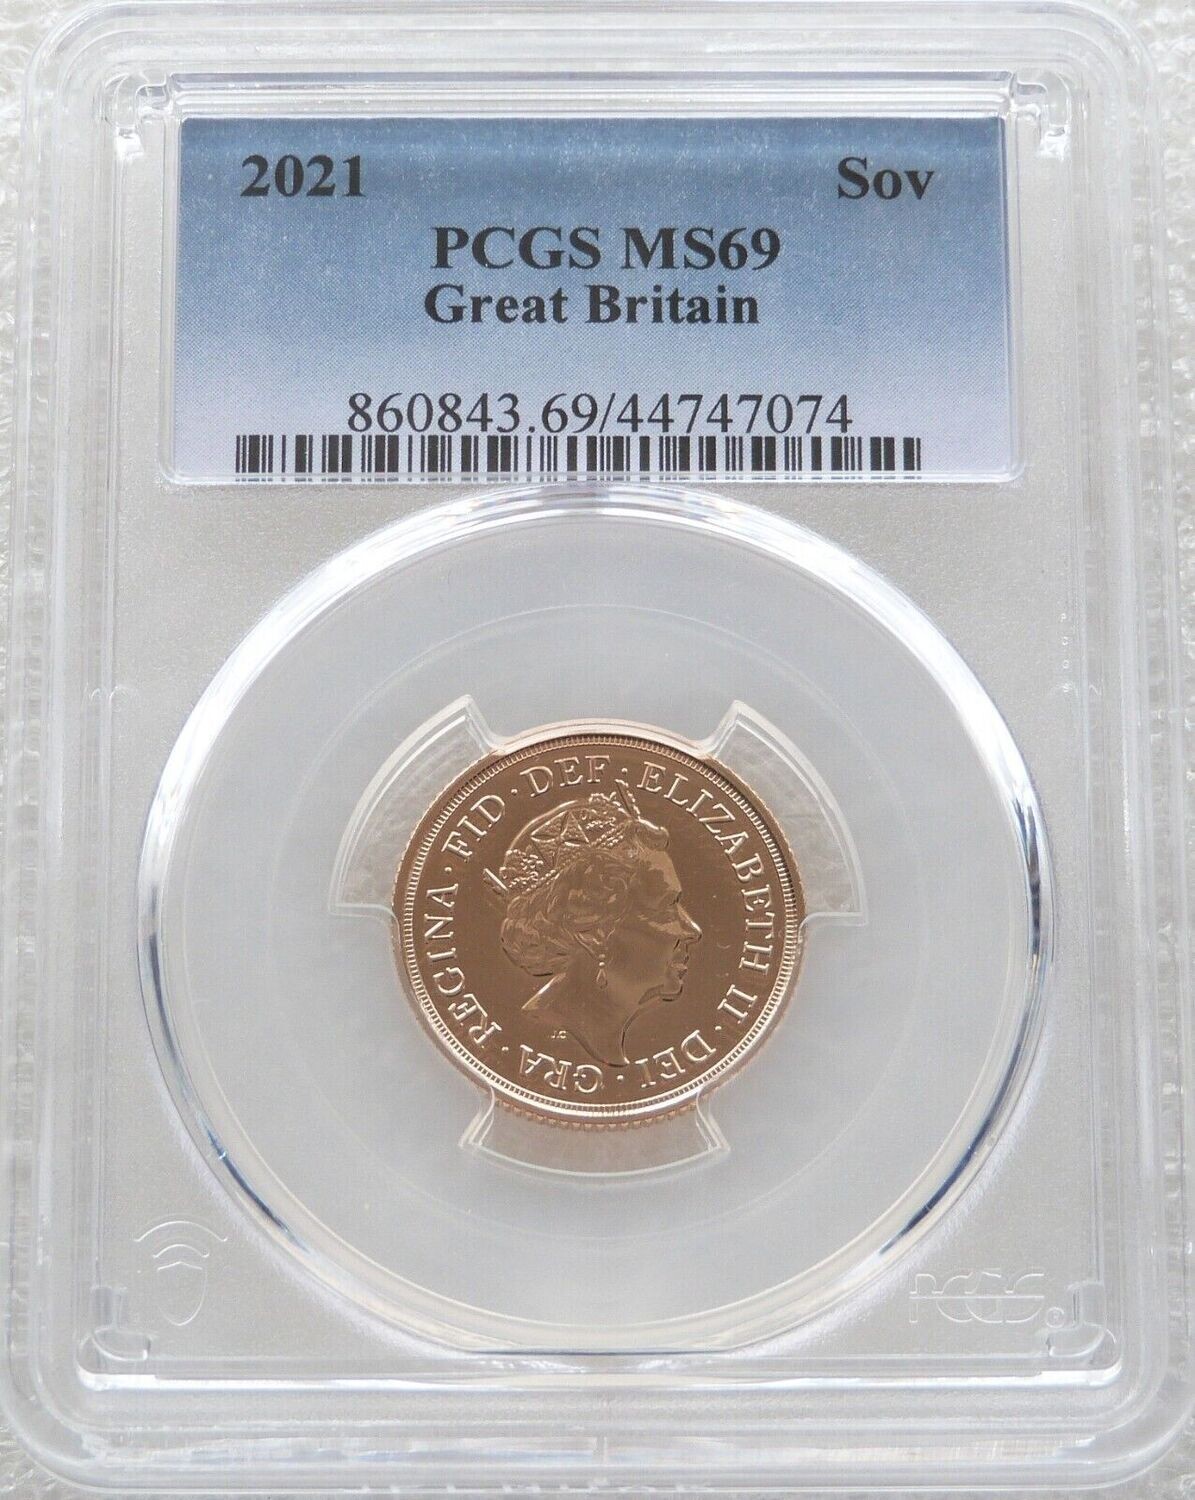 2021 St George and the Dragon Full Sovereign Gold Coin PCGS MS69